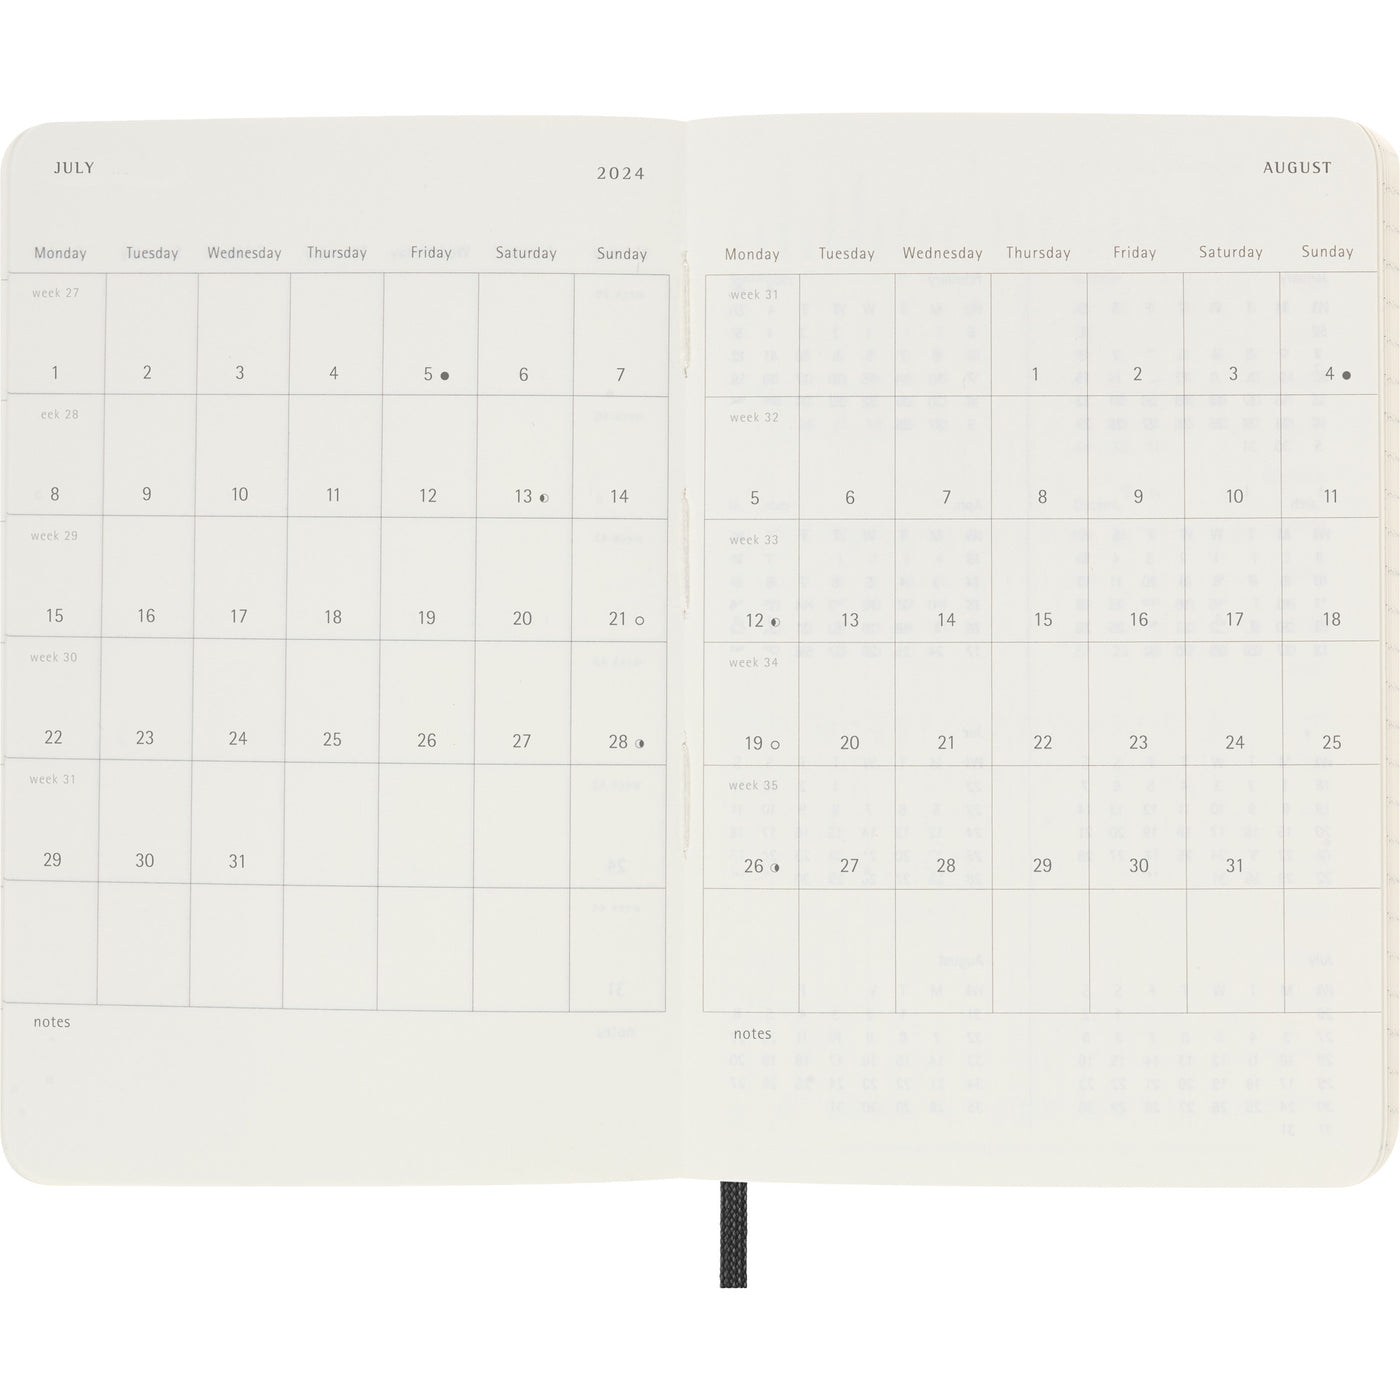 Moleskine Daily Softcover Planner - Pocket